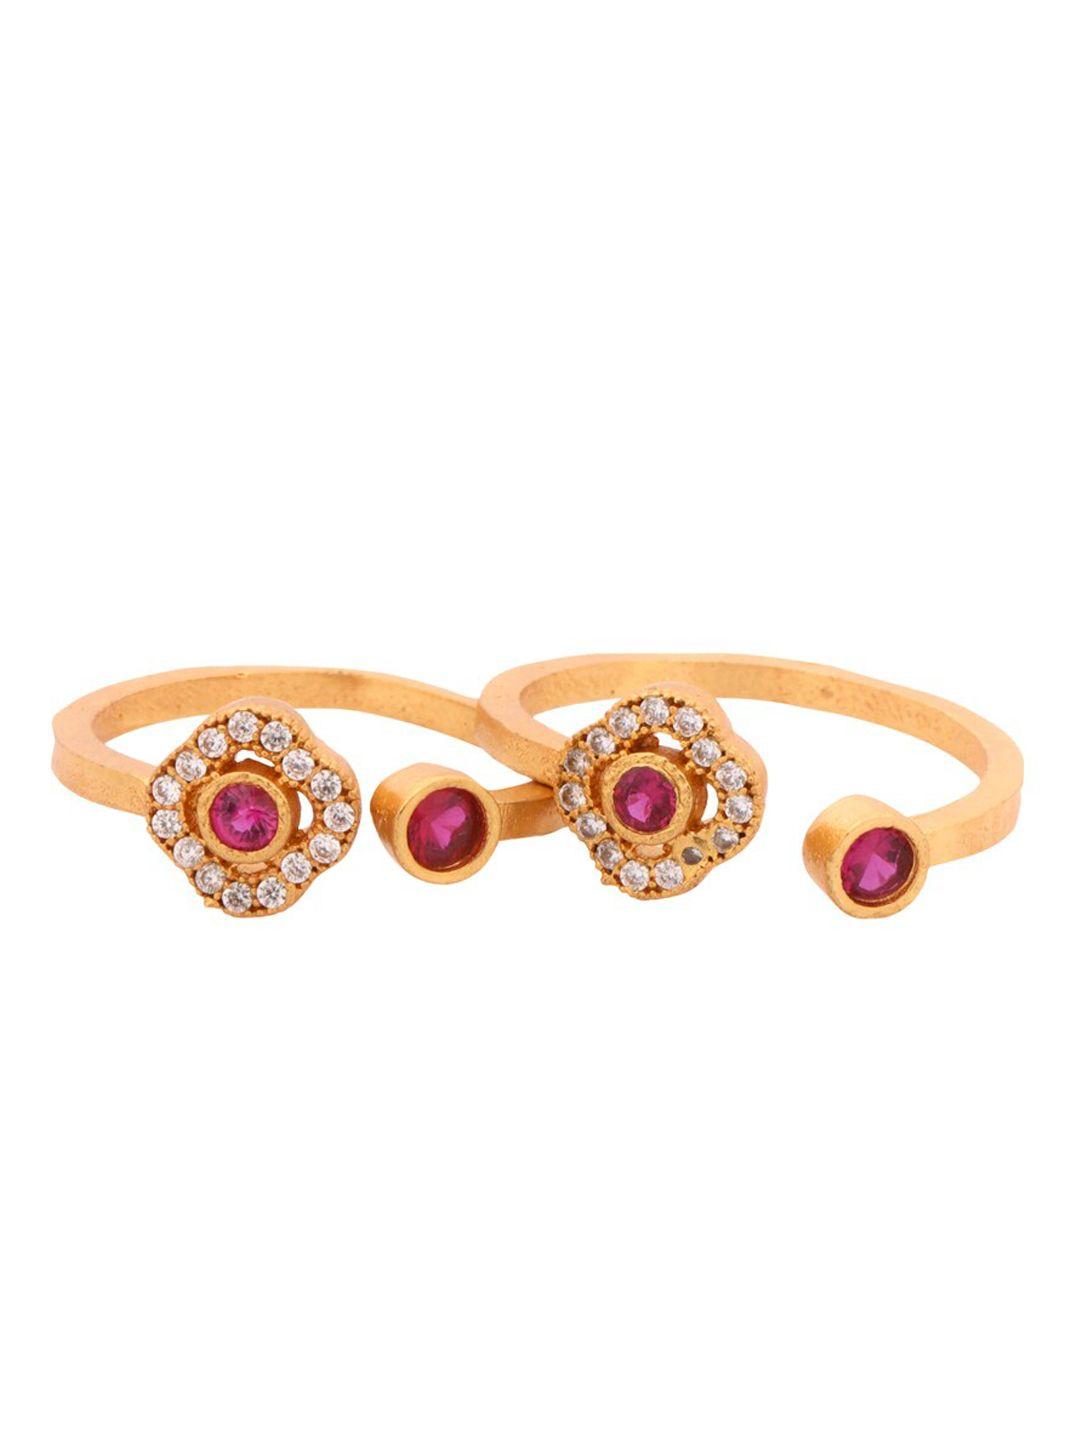 shoshaa-set-of-2-gold-plated-pink-&-white-stone-studded-handcrafted-toe-rings